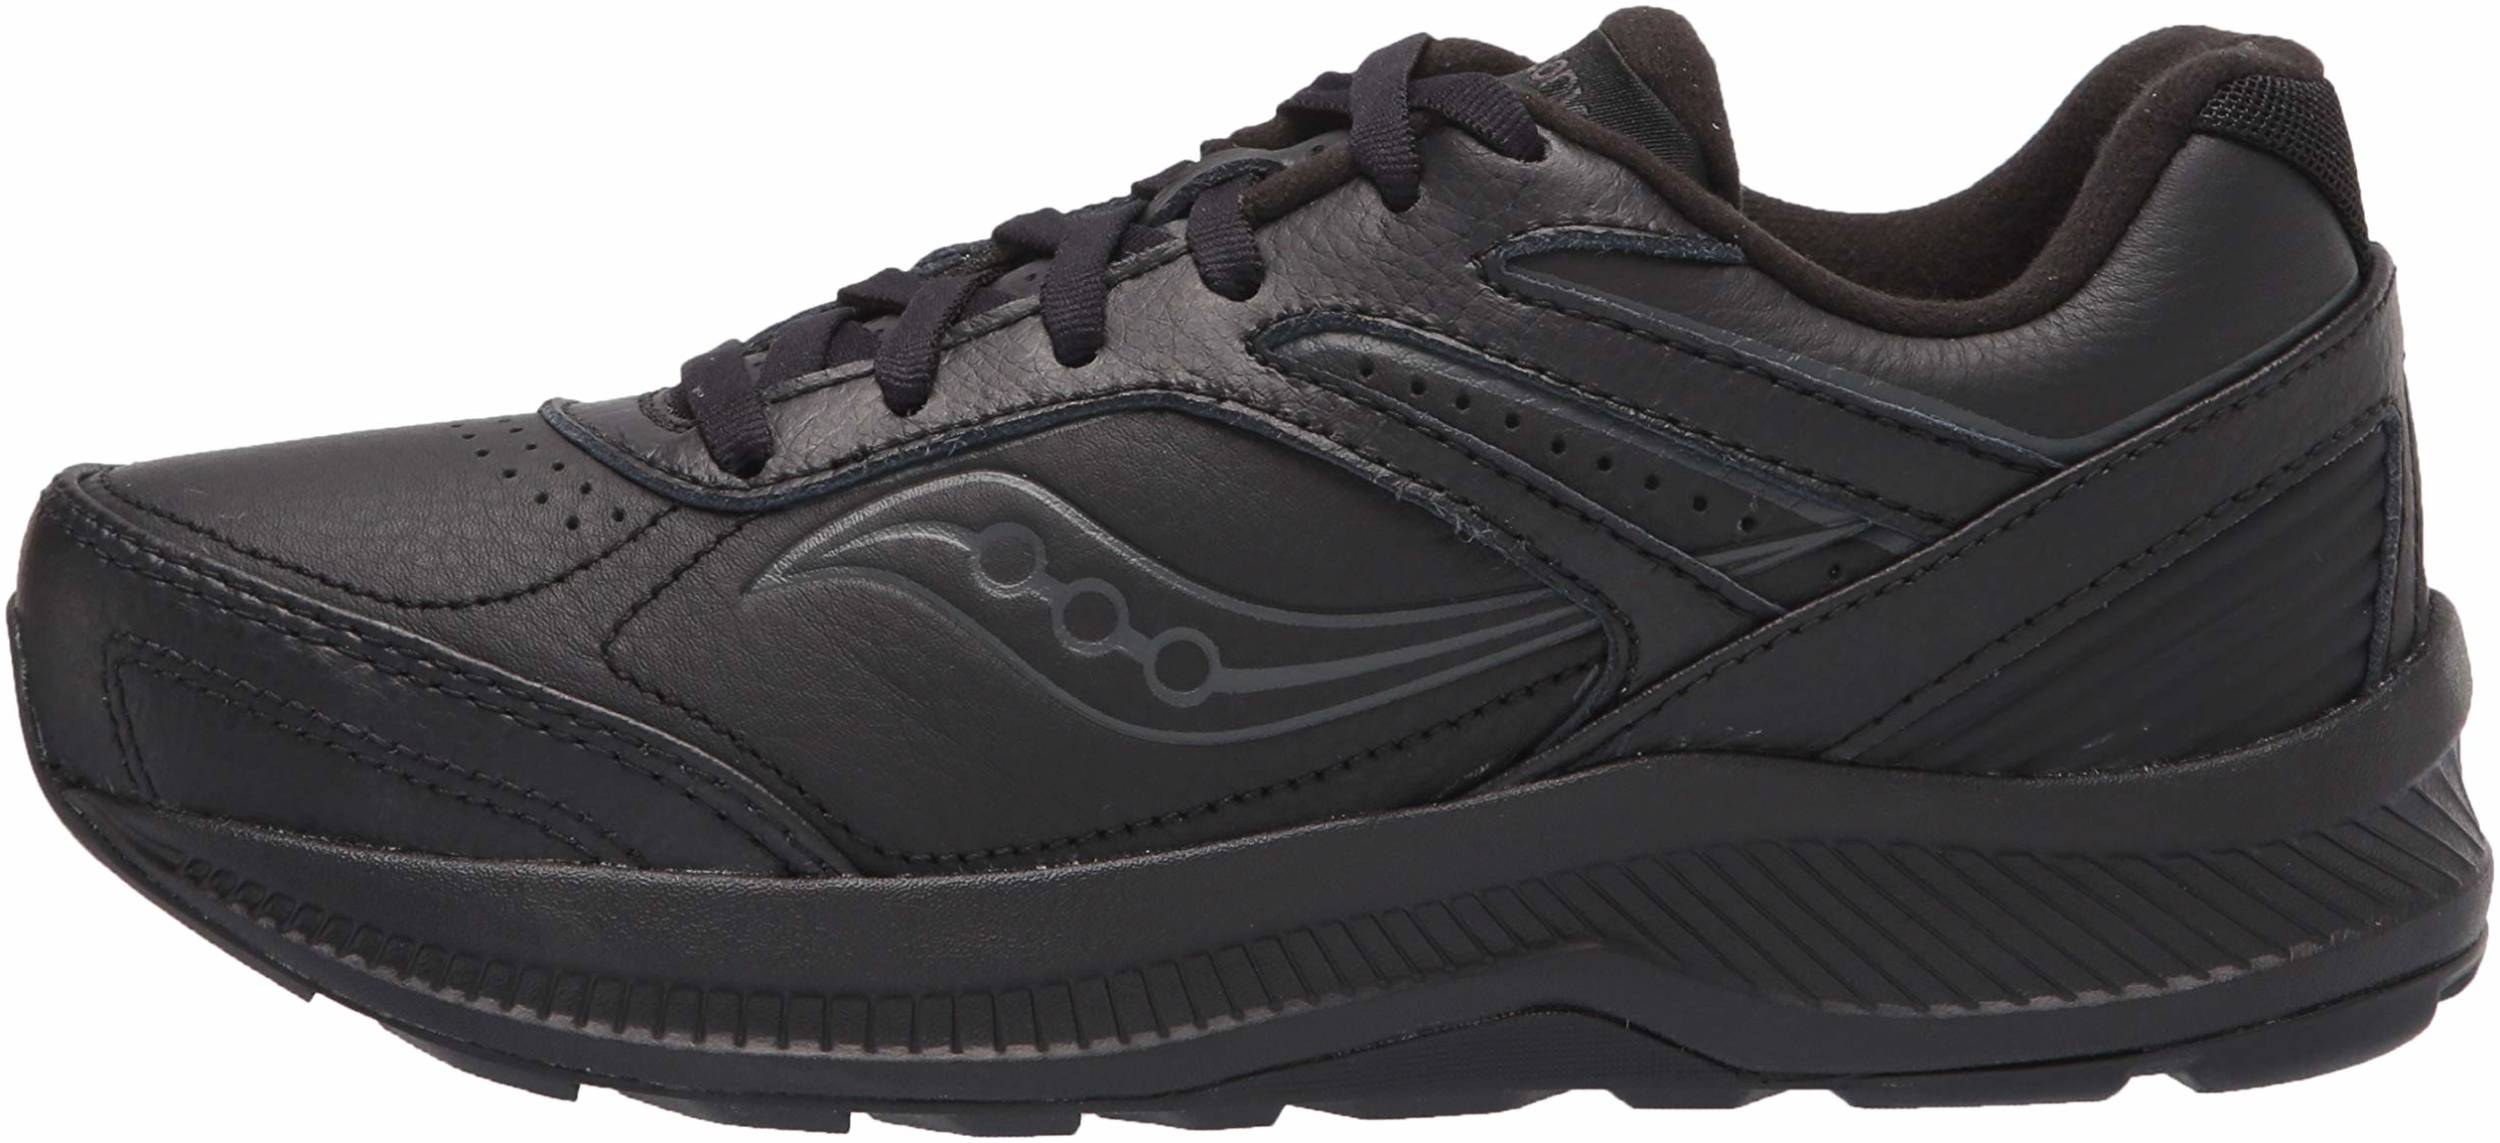 saucony outdoor shoes